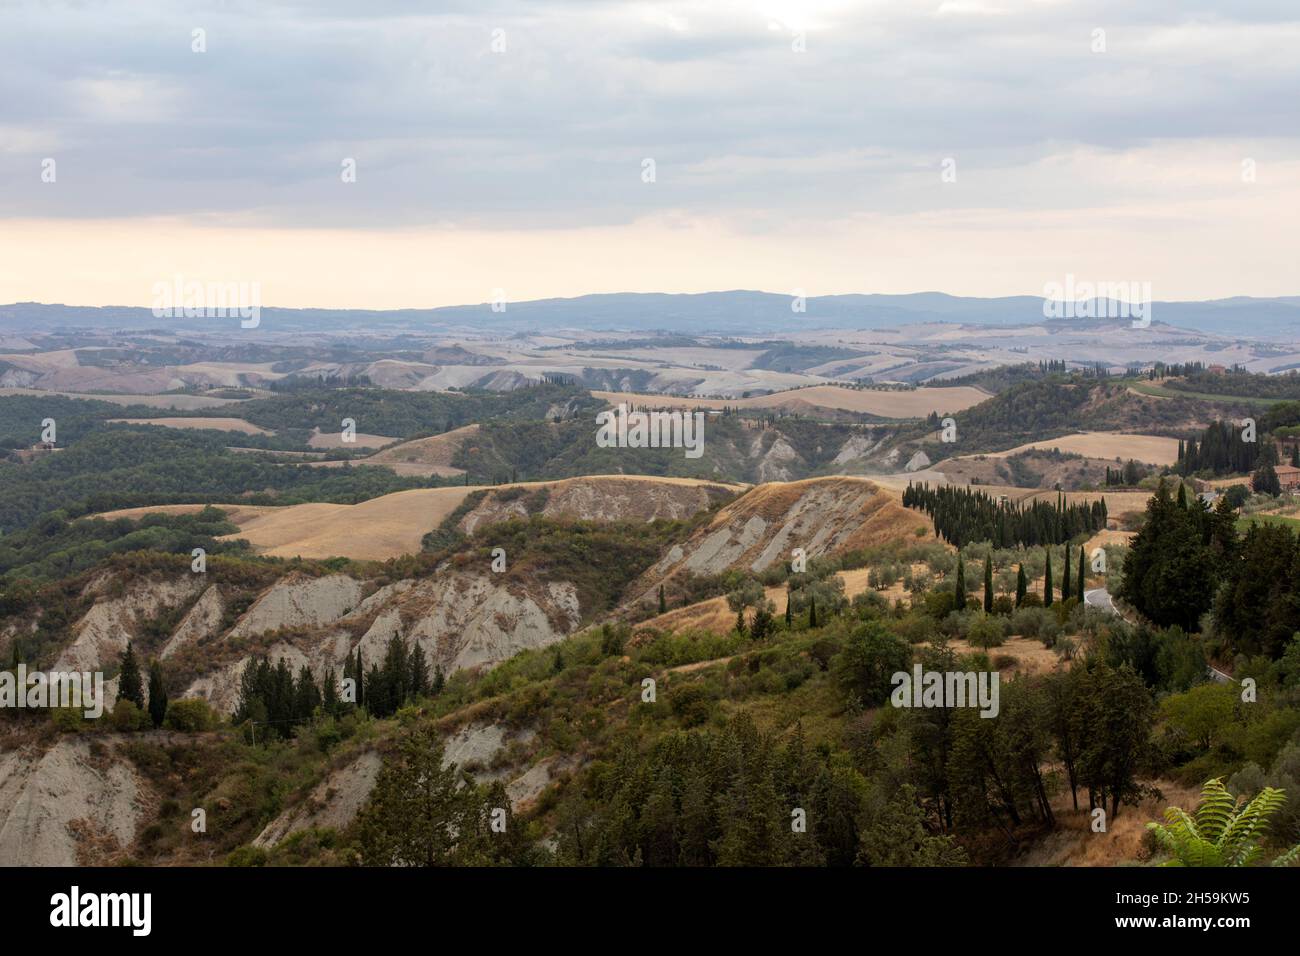 Landscape view from Chiusure village, Asciano, Tuscany, Italy Stock Photo